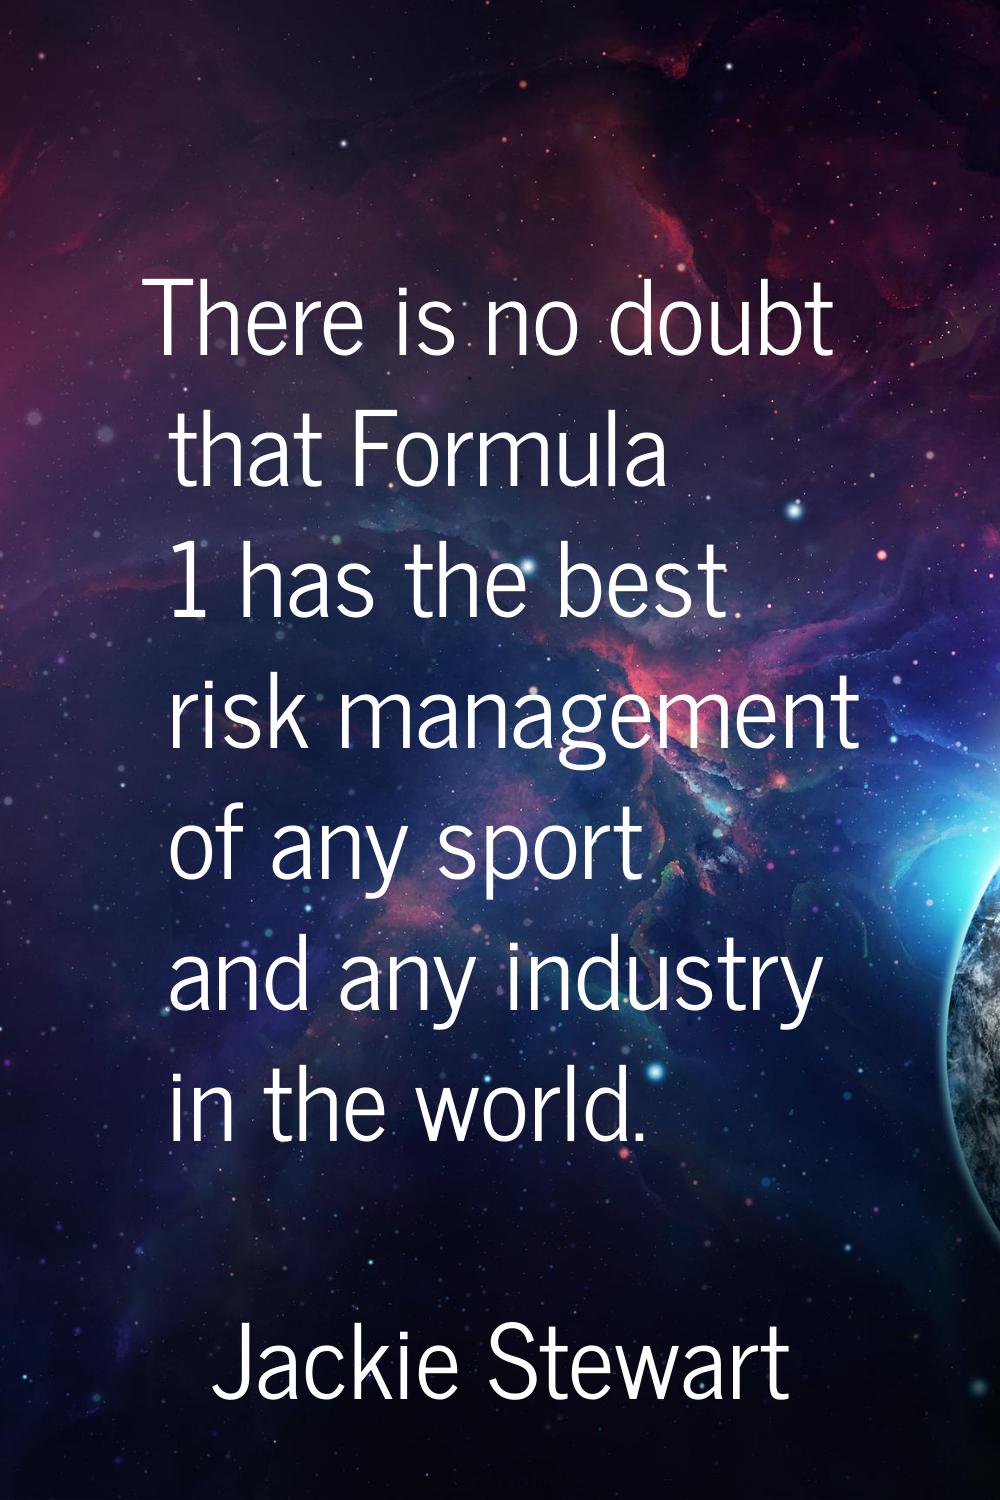 There is no doubt that Formula 1 has the best risk management of any sport and any industry in the 